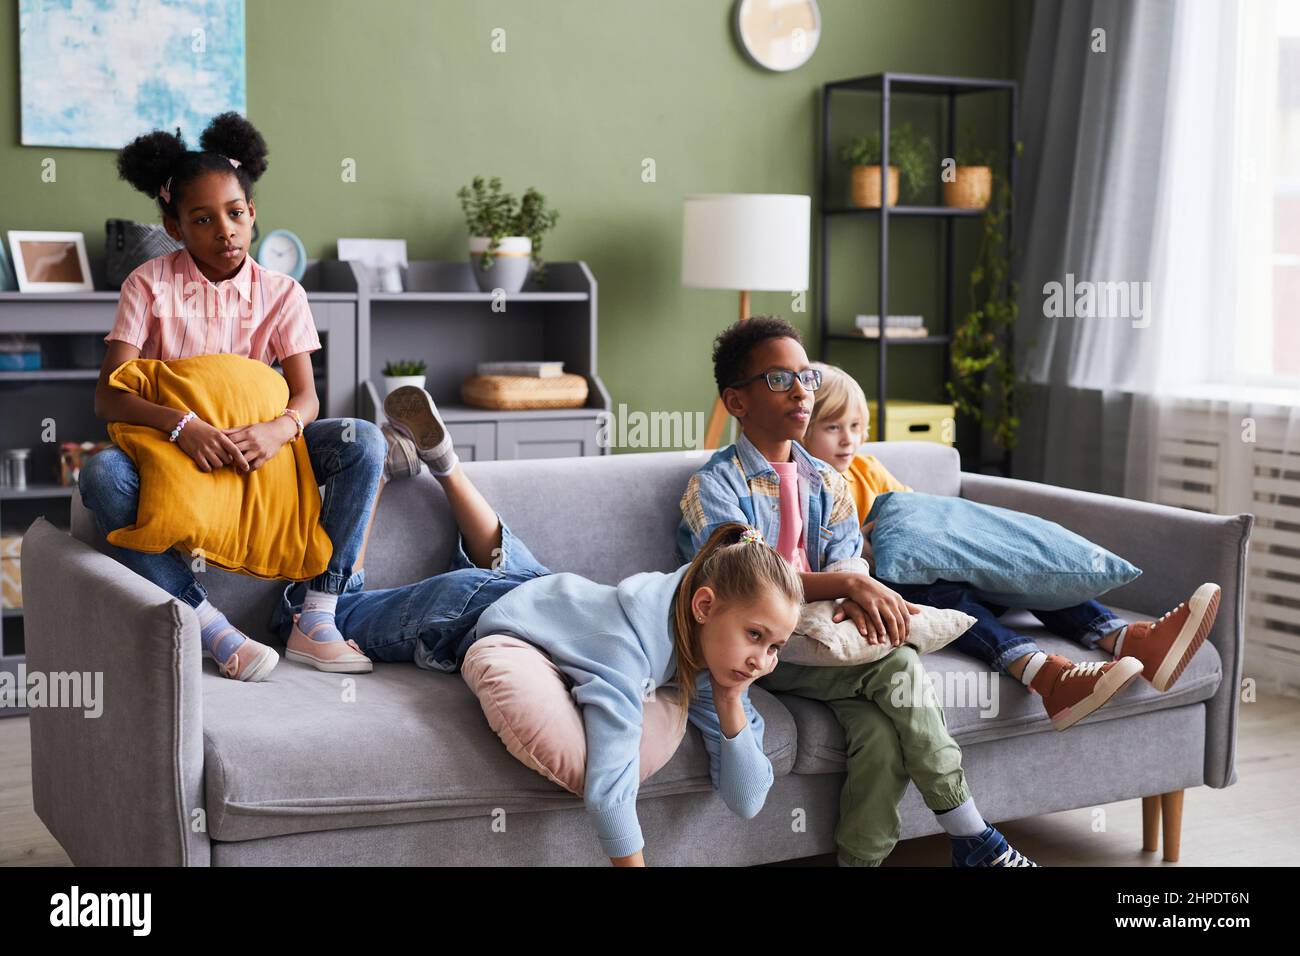 Diverse group of children watching TV at home while lounging on sofa looking bored Stock Photo